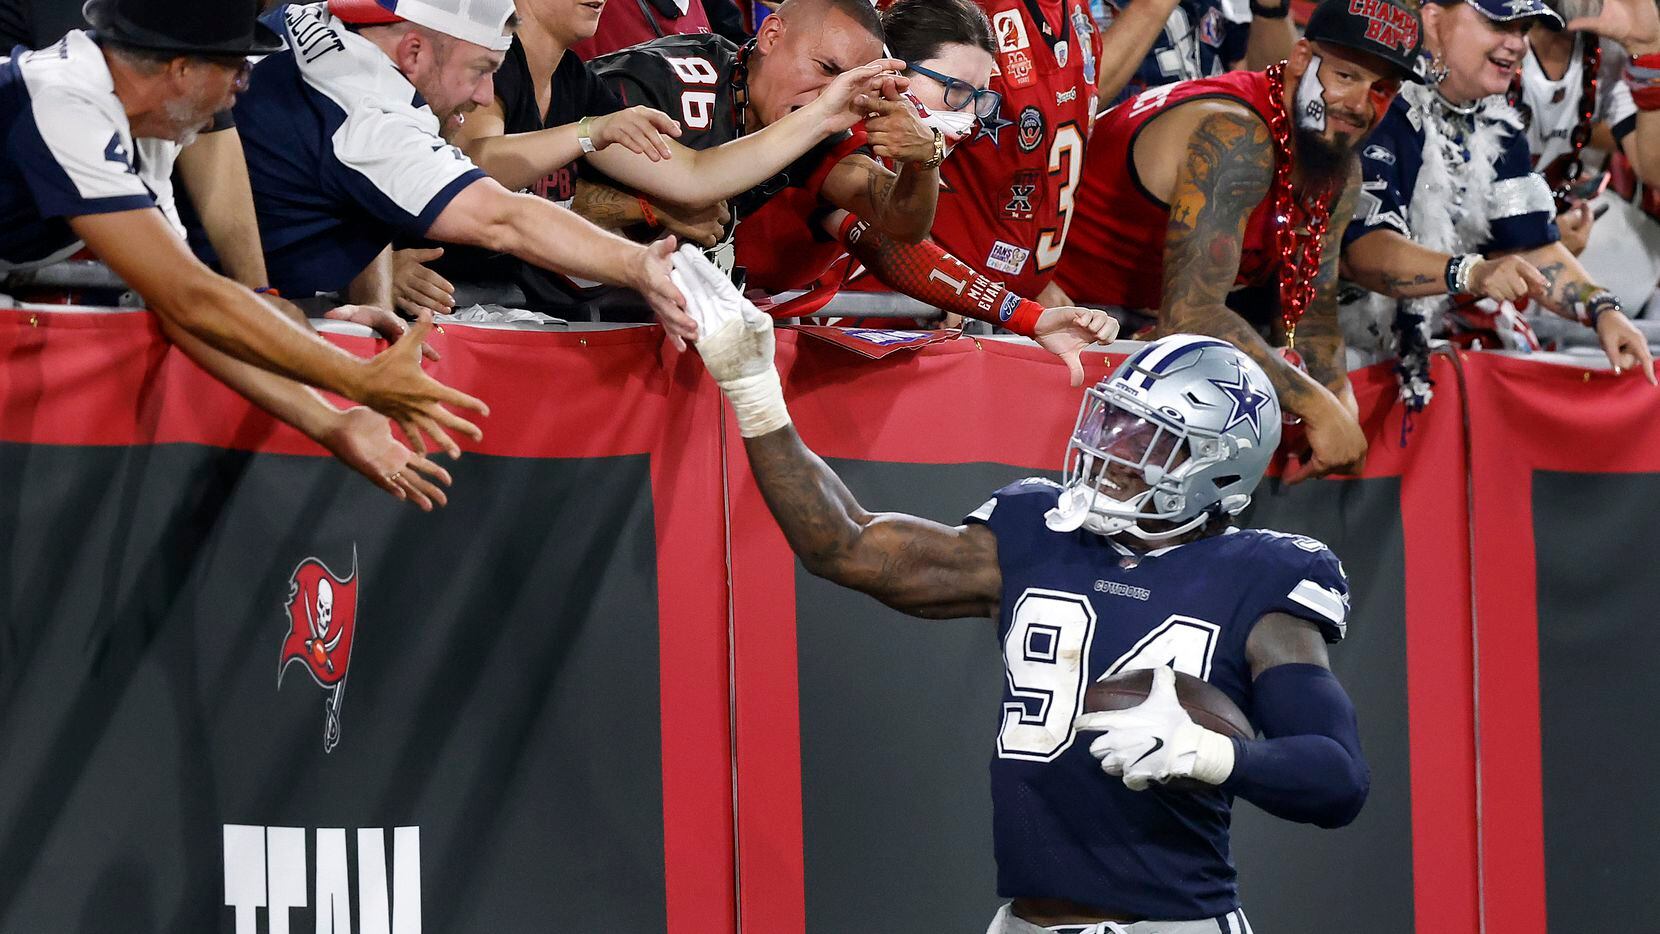 Dallas Cowboys defensive end Randy Gregory (94) receives high-fives from fans after his second quarter fumble recovery against the Tampa Bay Buccaneers at Raymond James Stadium in Tampa, Florida, Thursday, September 9, 2021. The Cowboys faced the Tampa Bay Buccaneers in the NFL season opener.